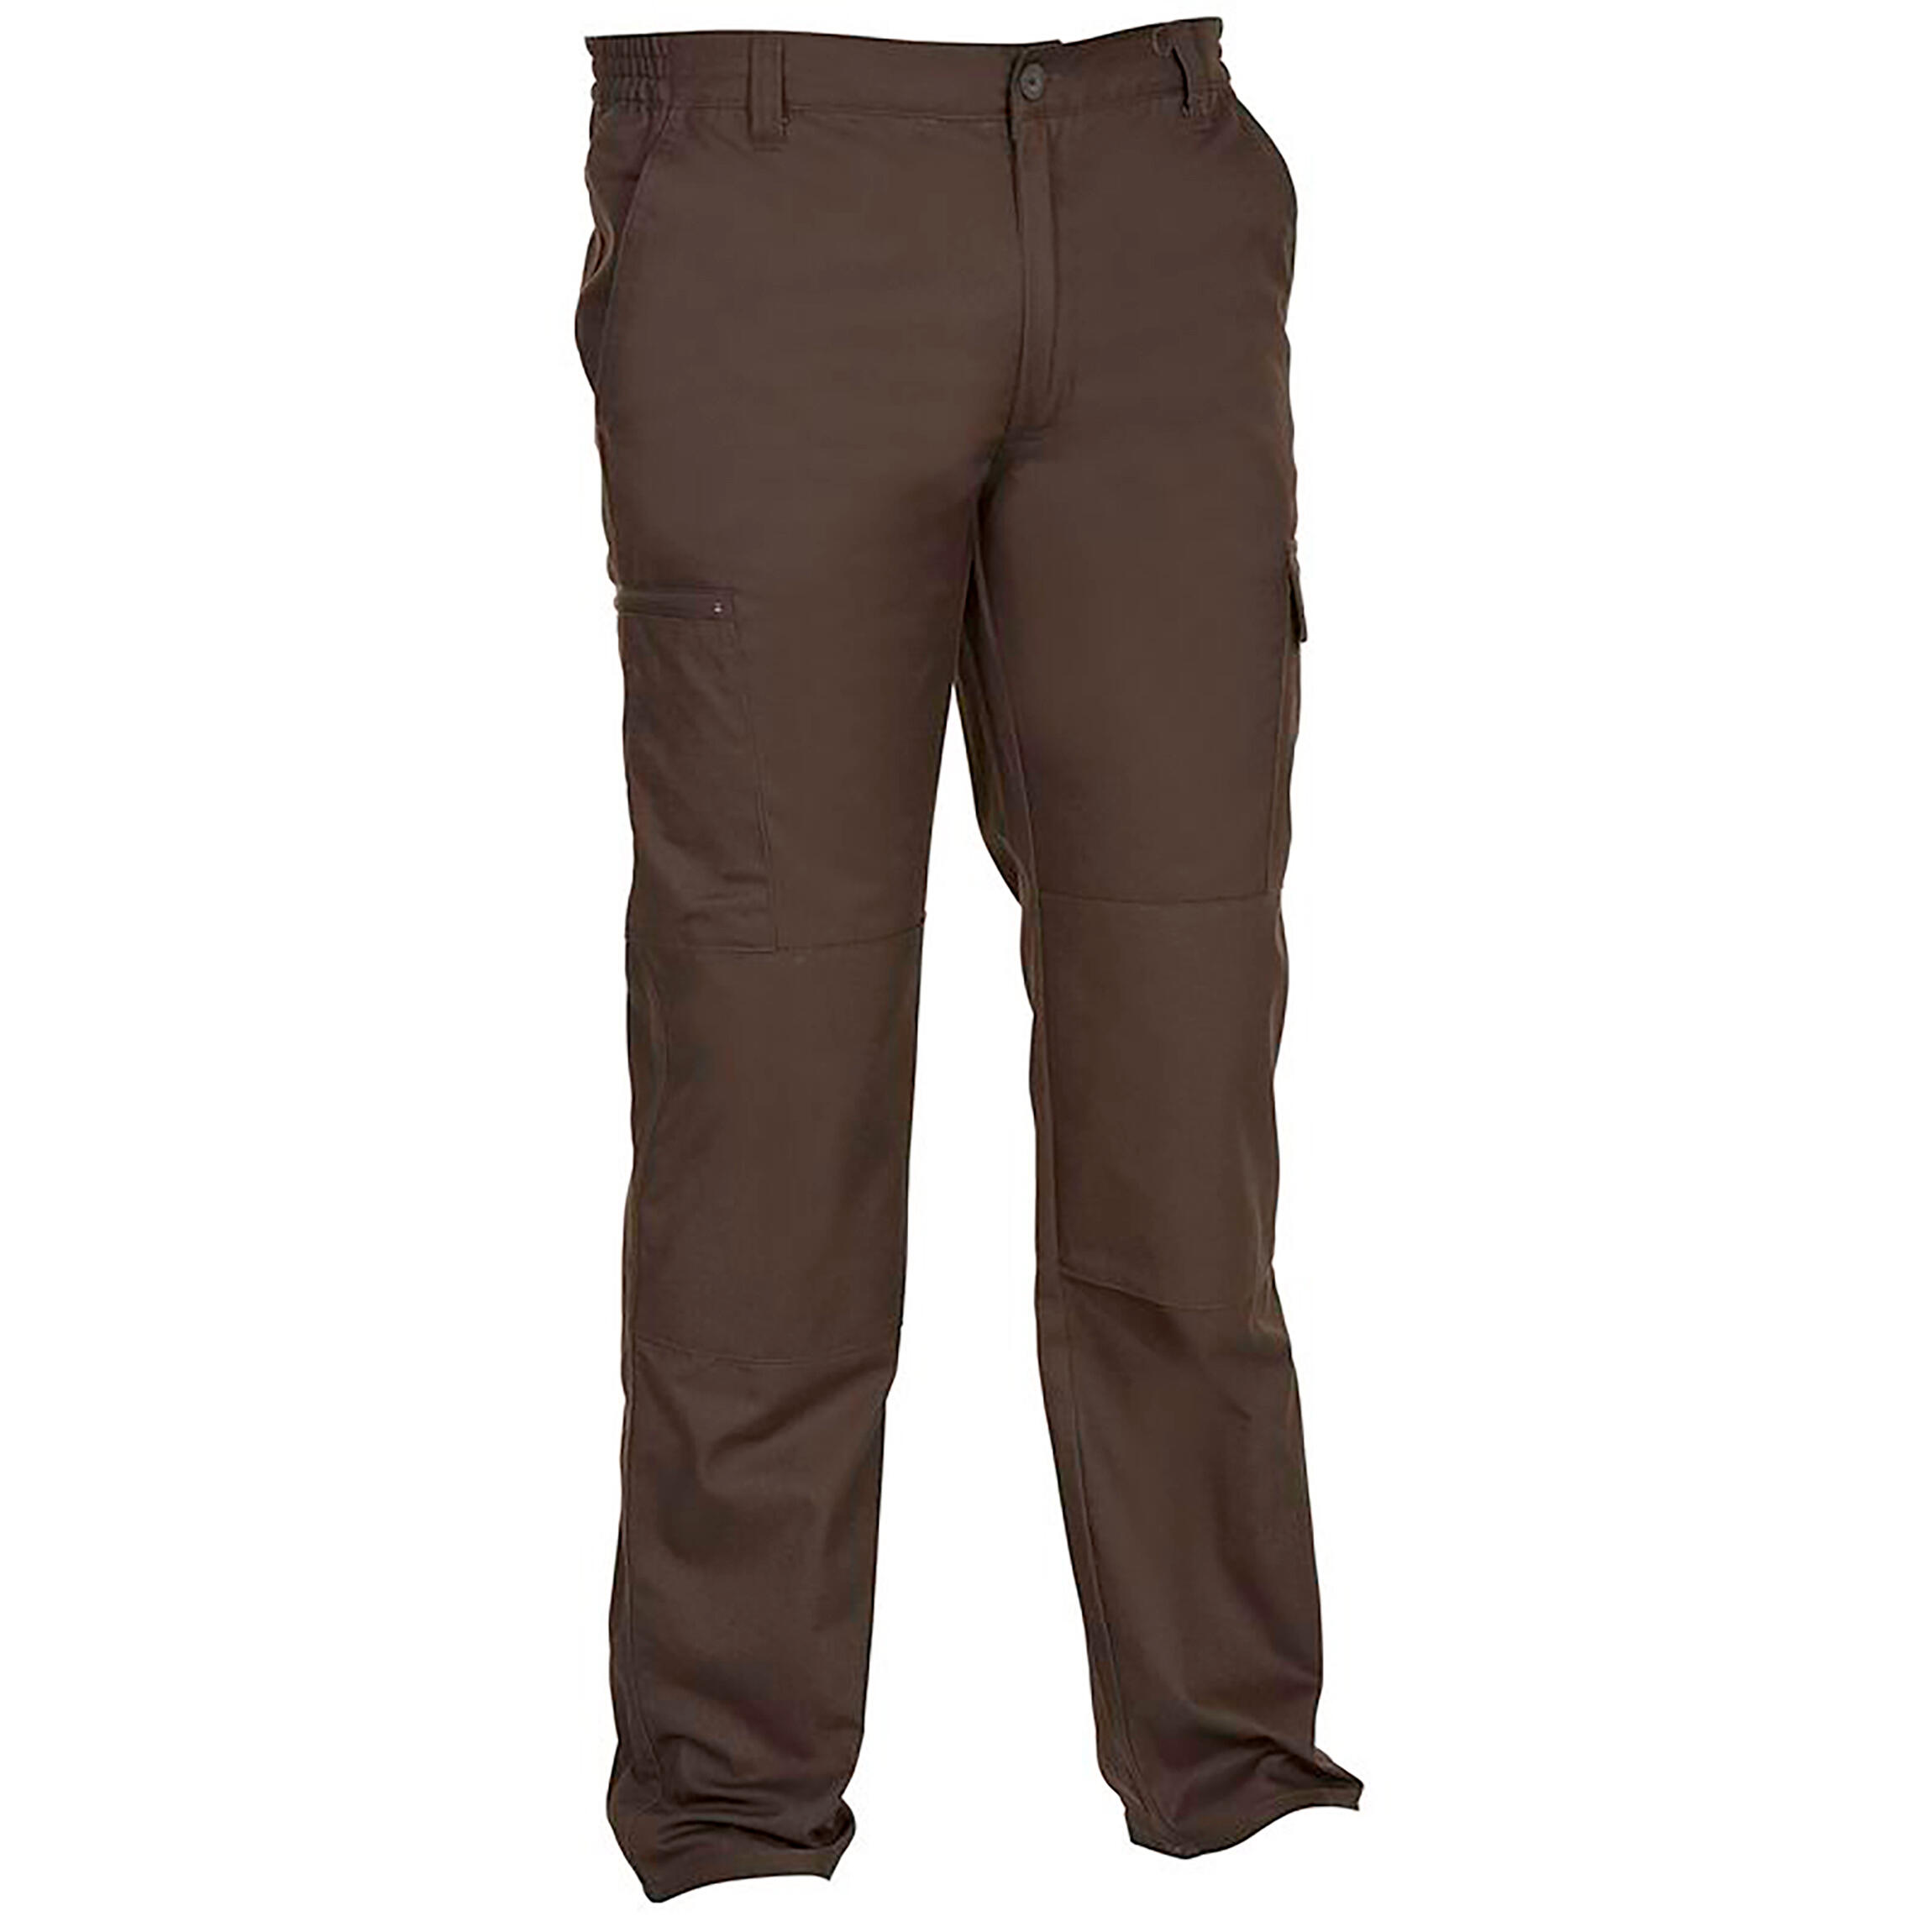 Buy Pants for Outdoor Sports at Year Warranty